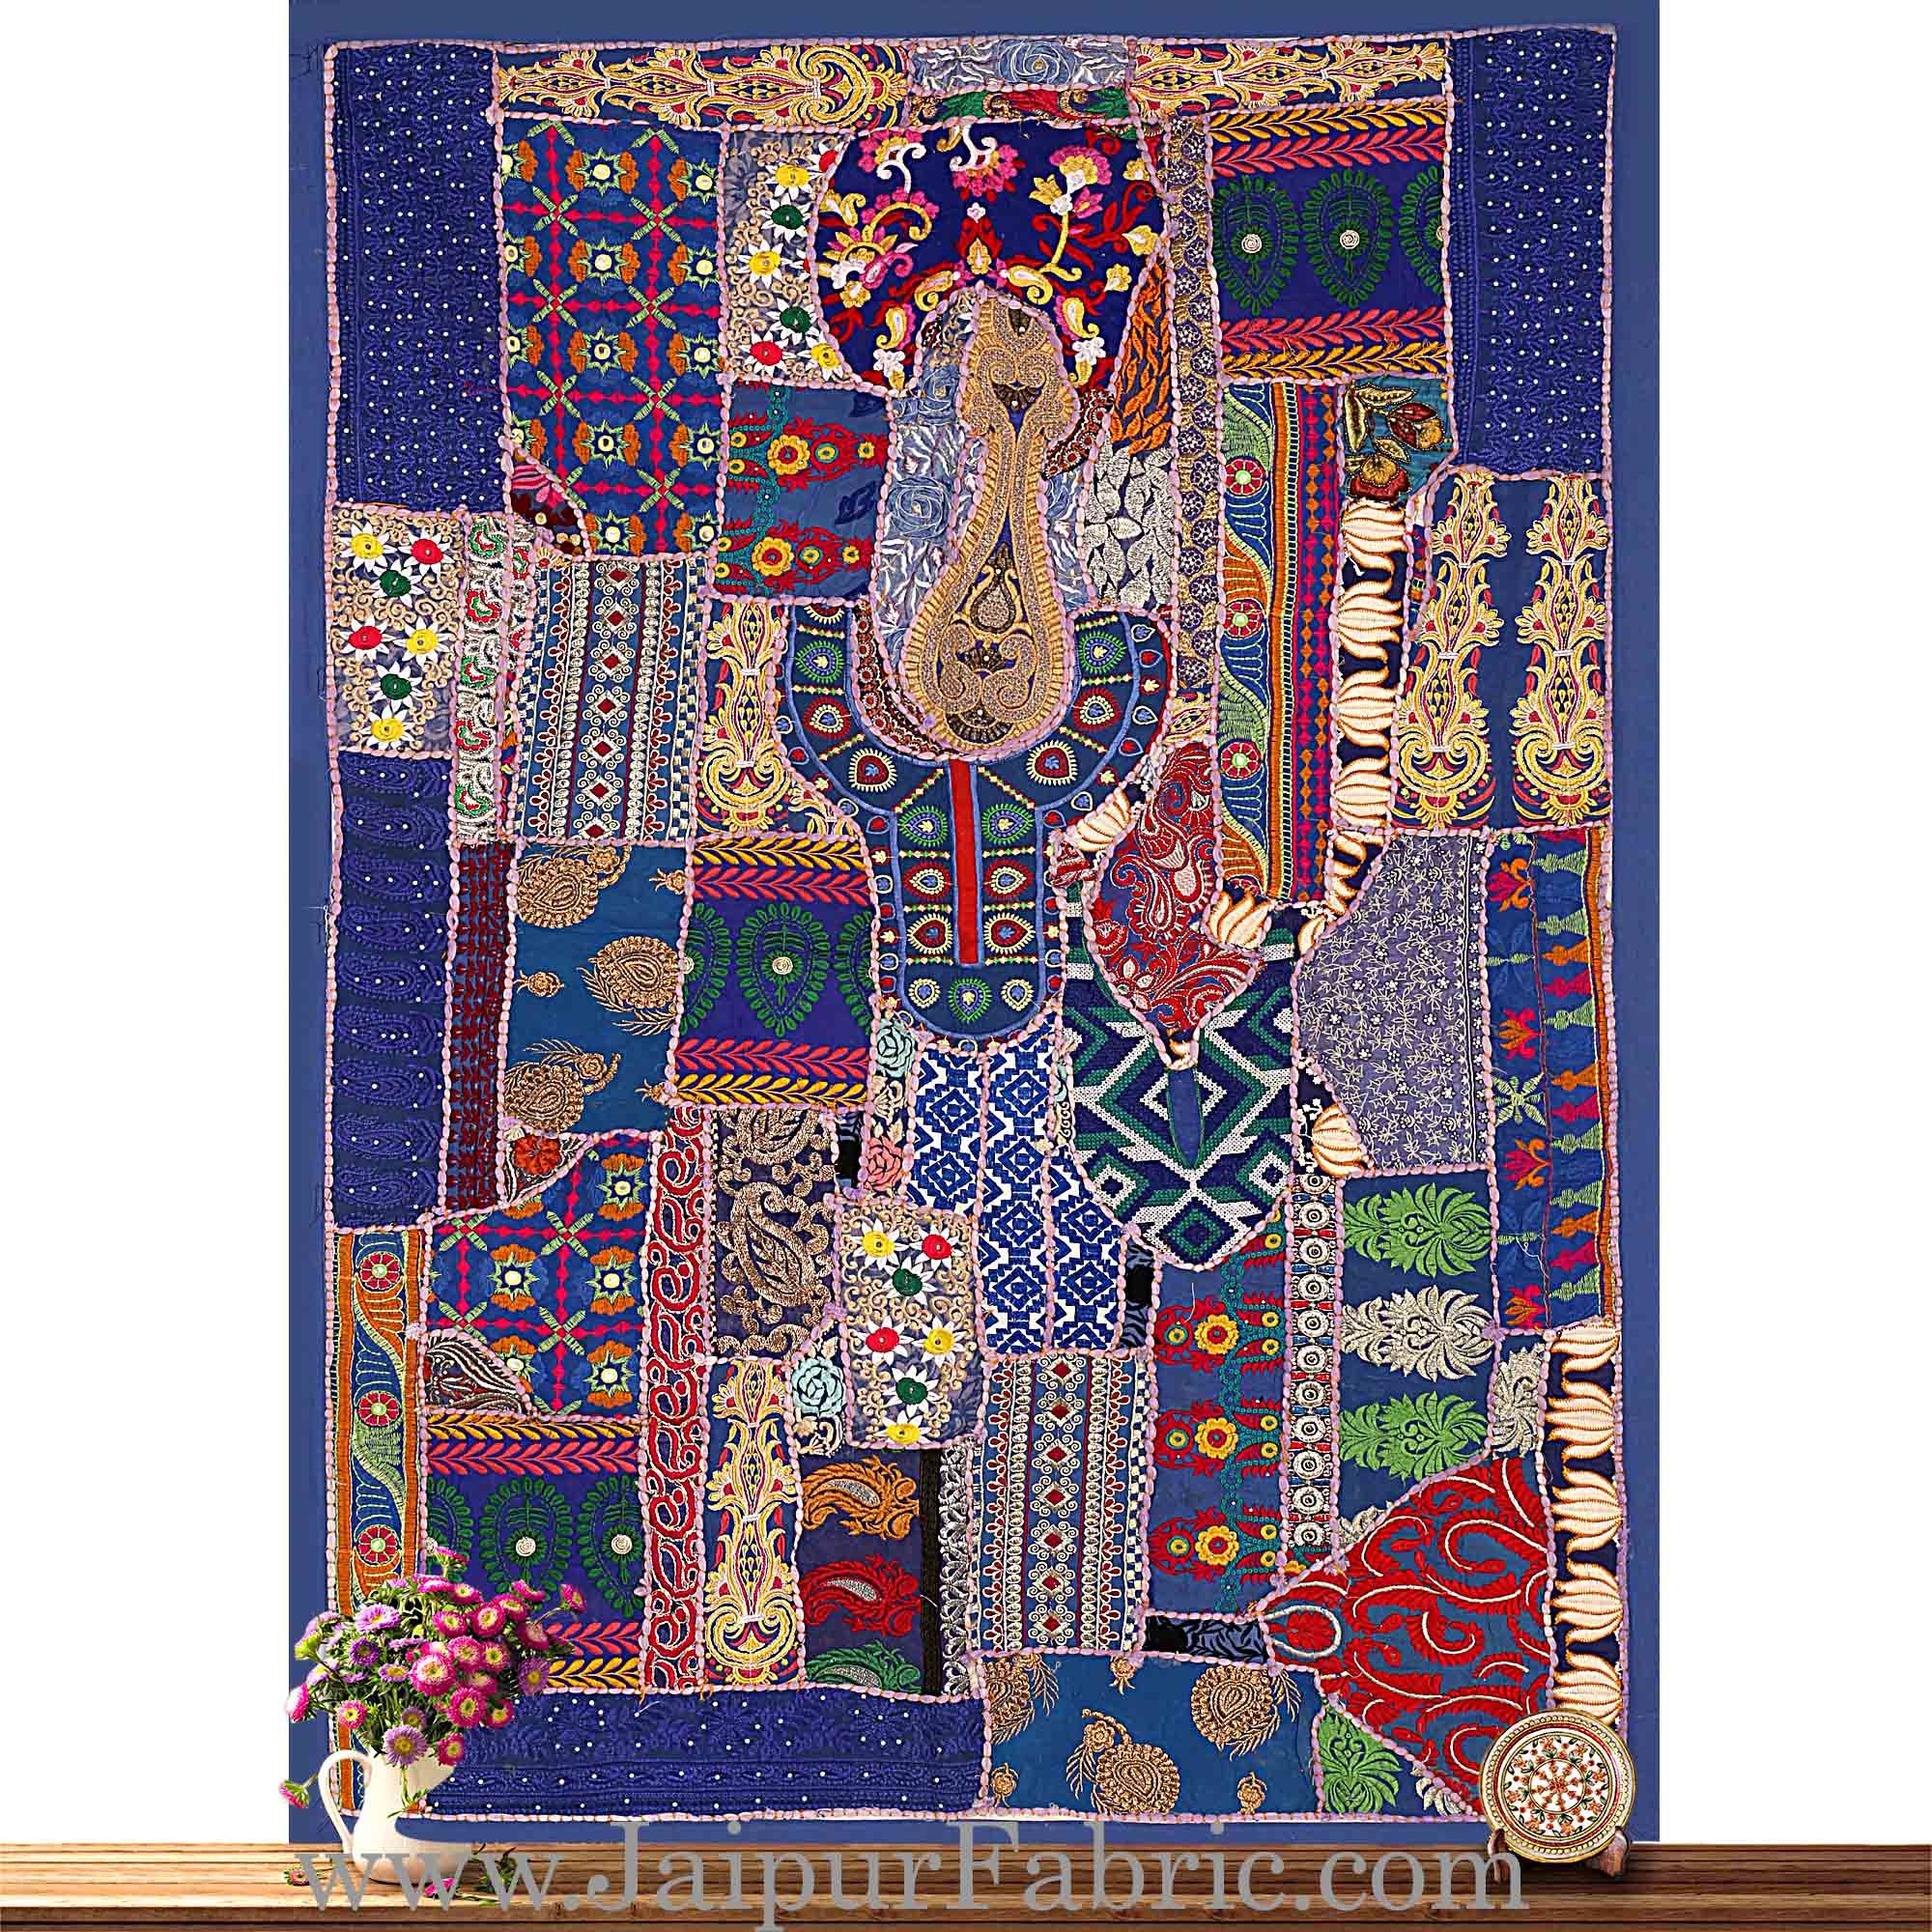 Wall Hanging Embroidered Patchwork With Applique work Multi Color Designs